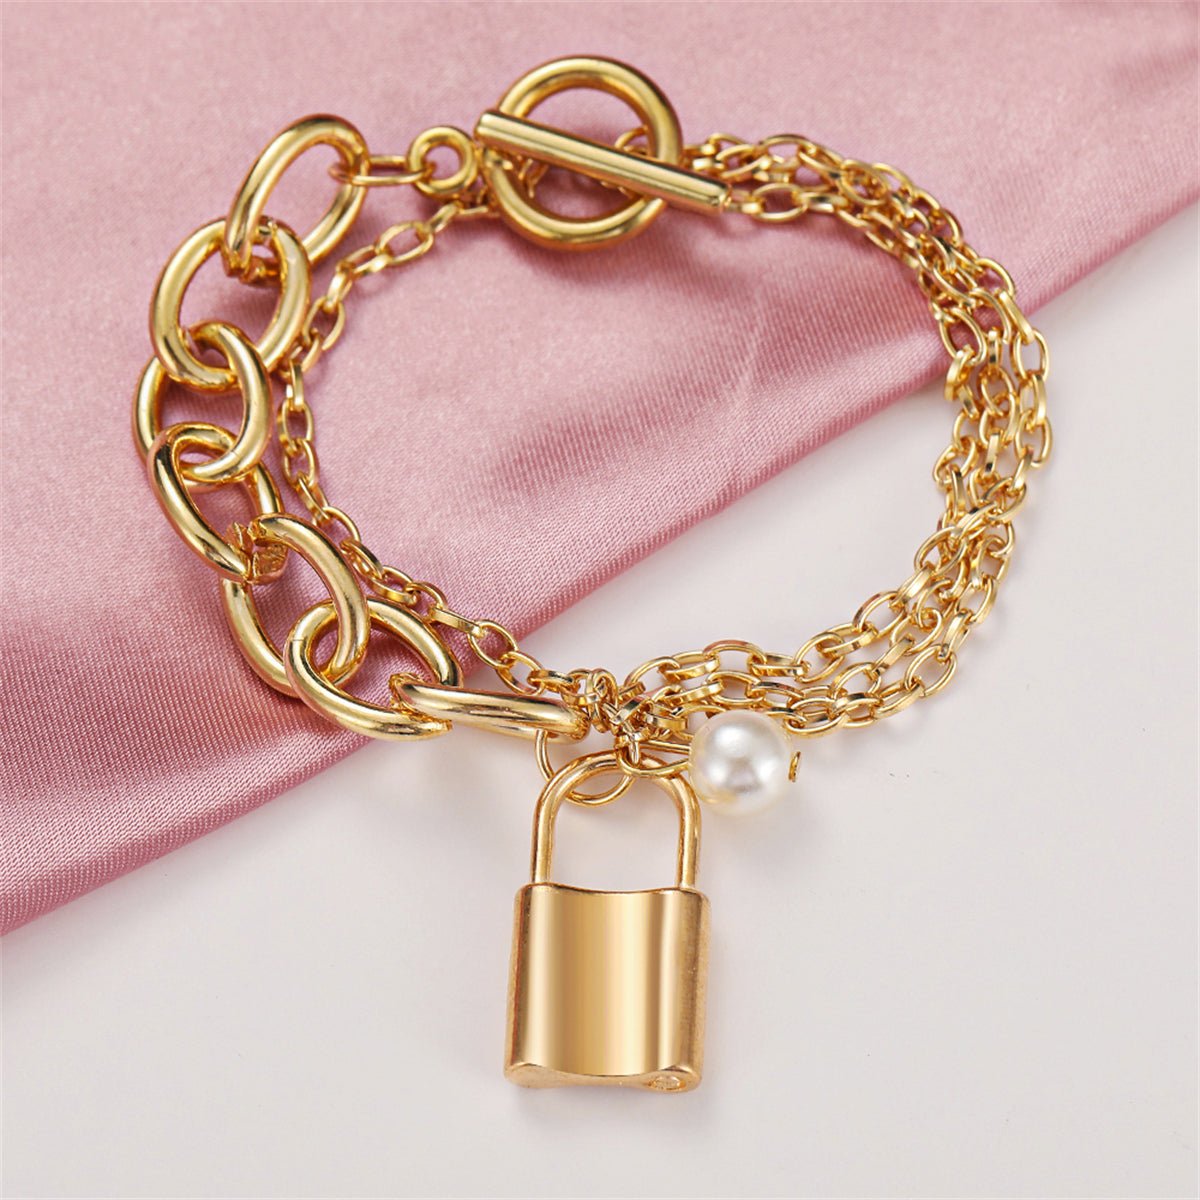 Pearl & 18K Gold-Plated Layered Chain Lock Charm Anklet